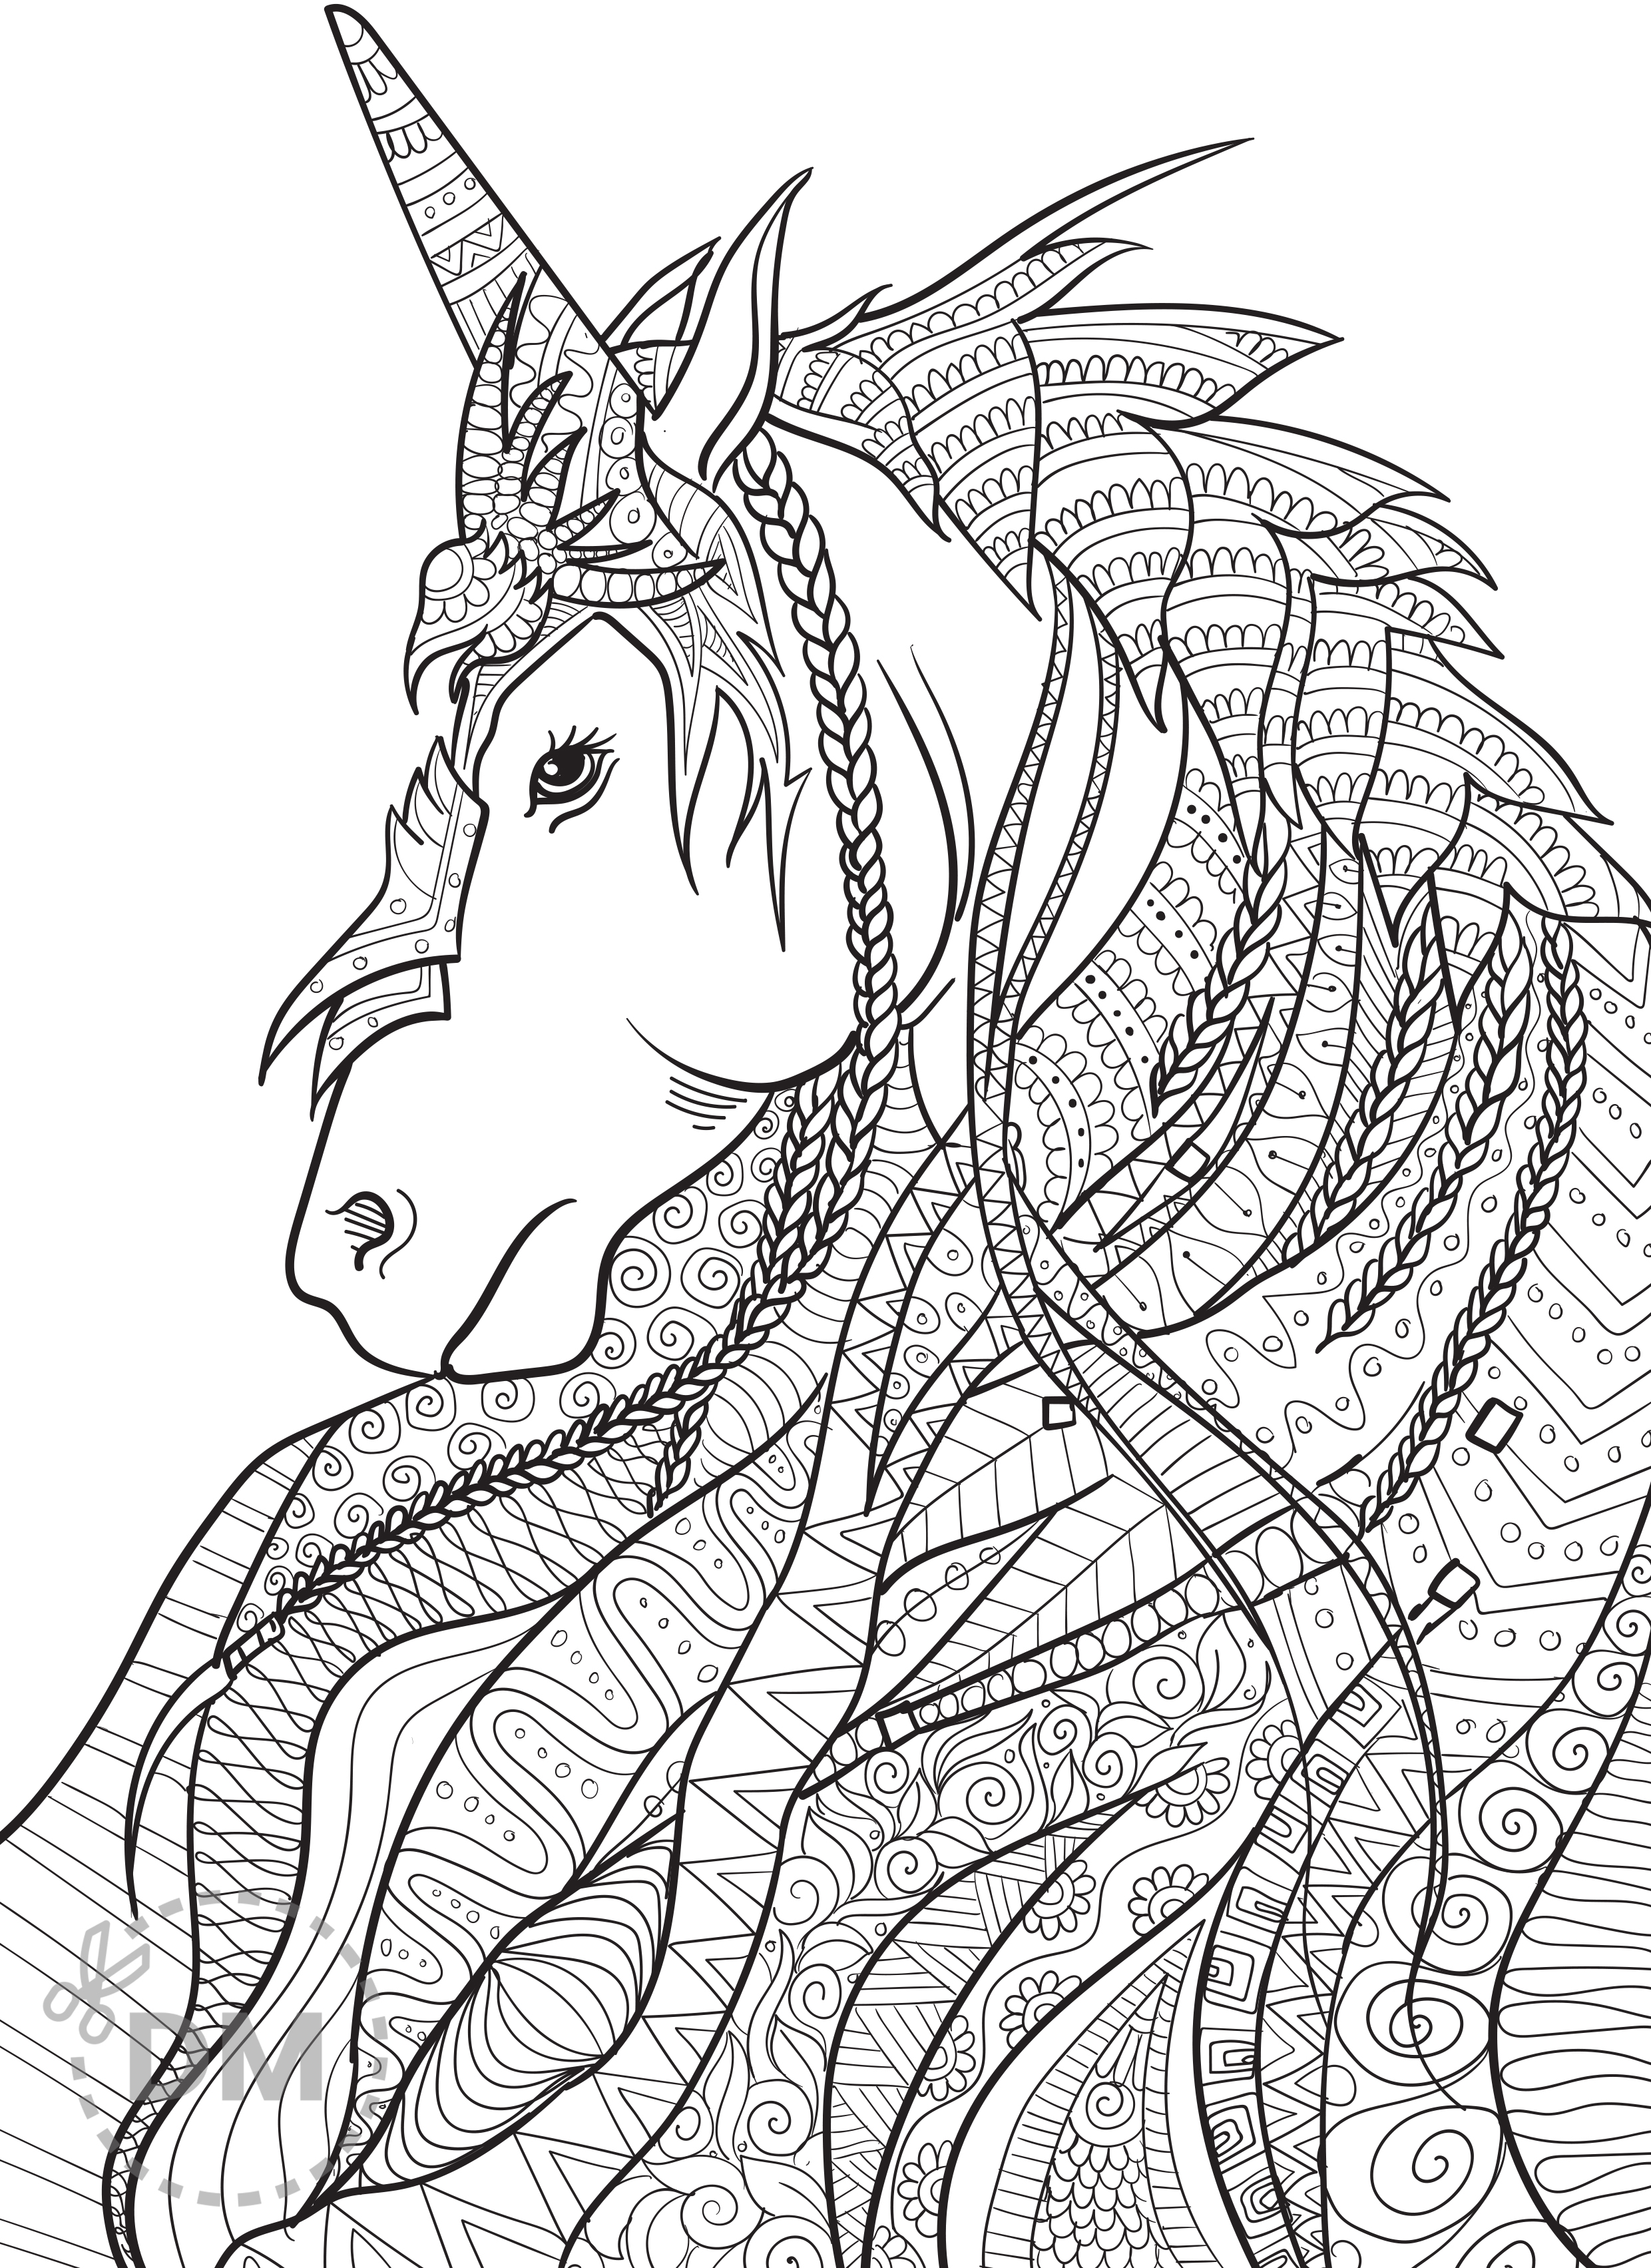 unicorn coloring page for adults printable page for download diy magazine com